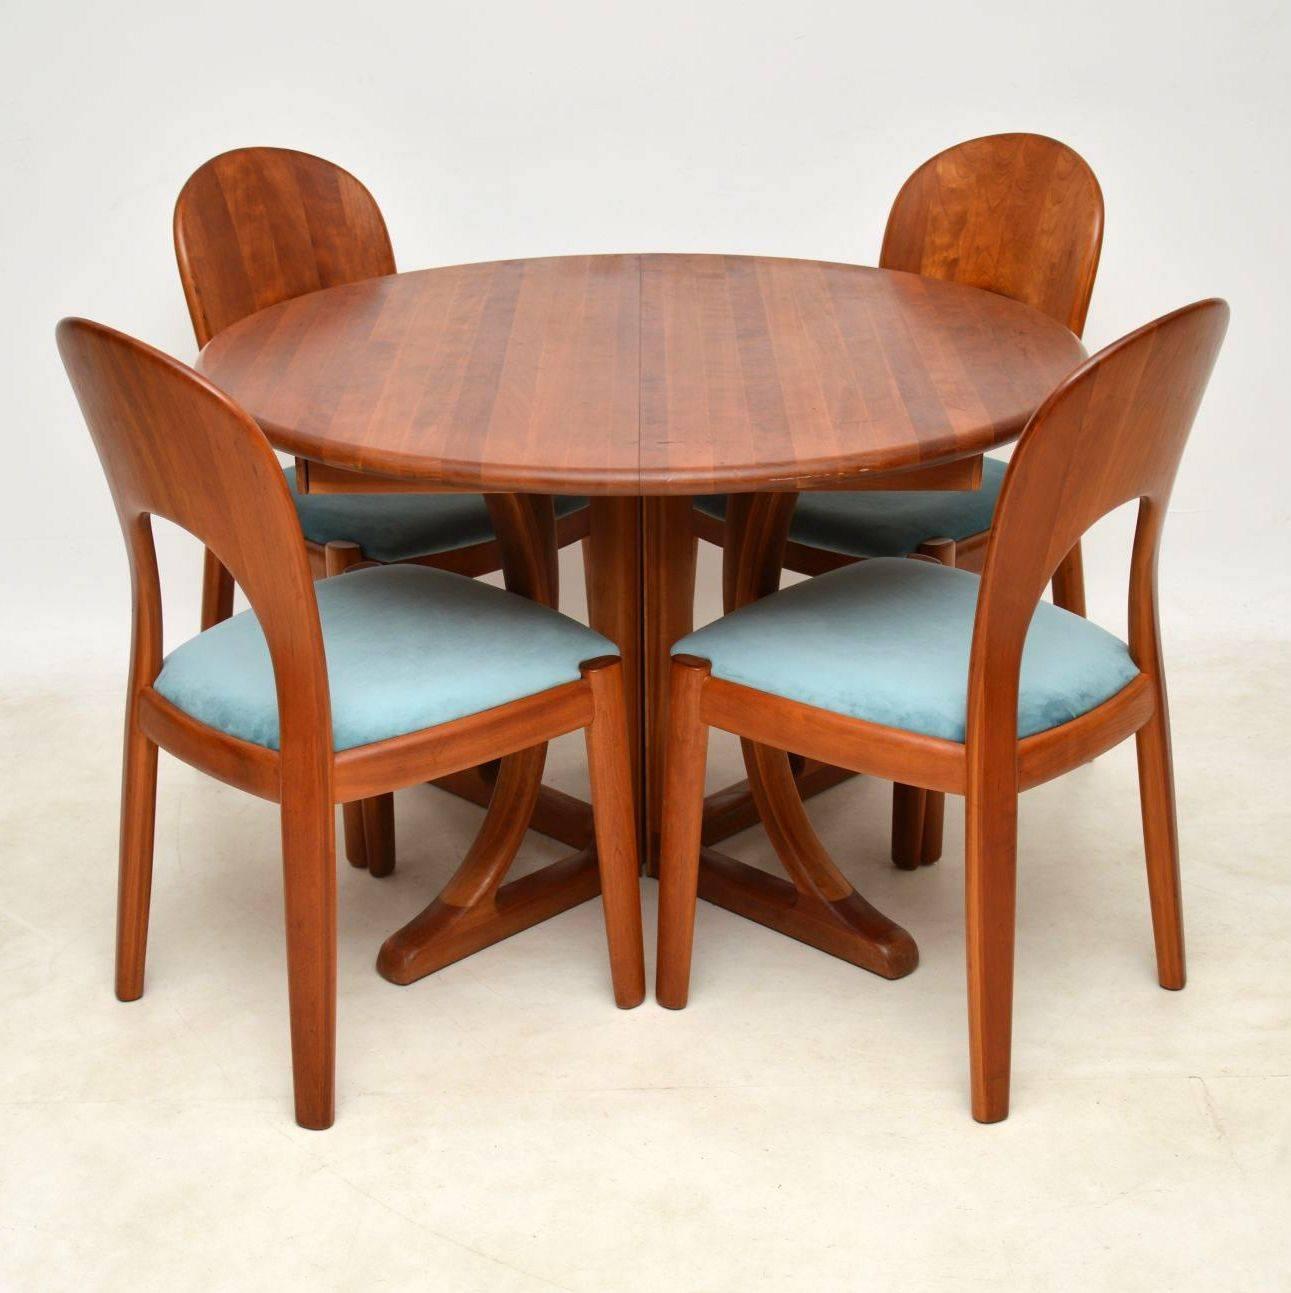 A stunning vintage solid teak Danish dining suite designed by Niels Koefoed for Koefoeds Hornslet, the chairs are called ‘Morten’ chairs. This dates from around the 1960s-1970s, the condition is excellent and the quality is phenomenal. This is solid